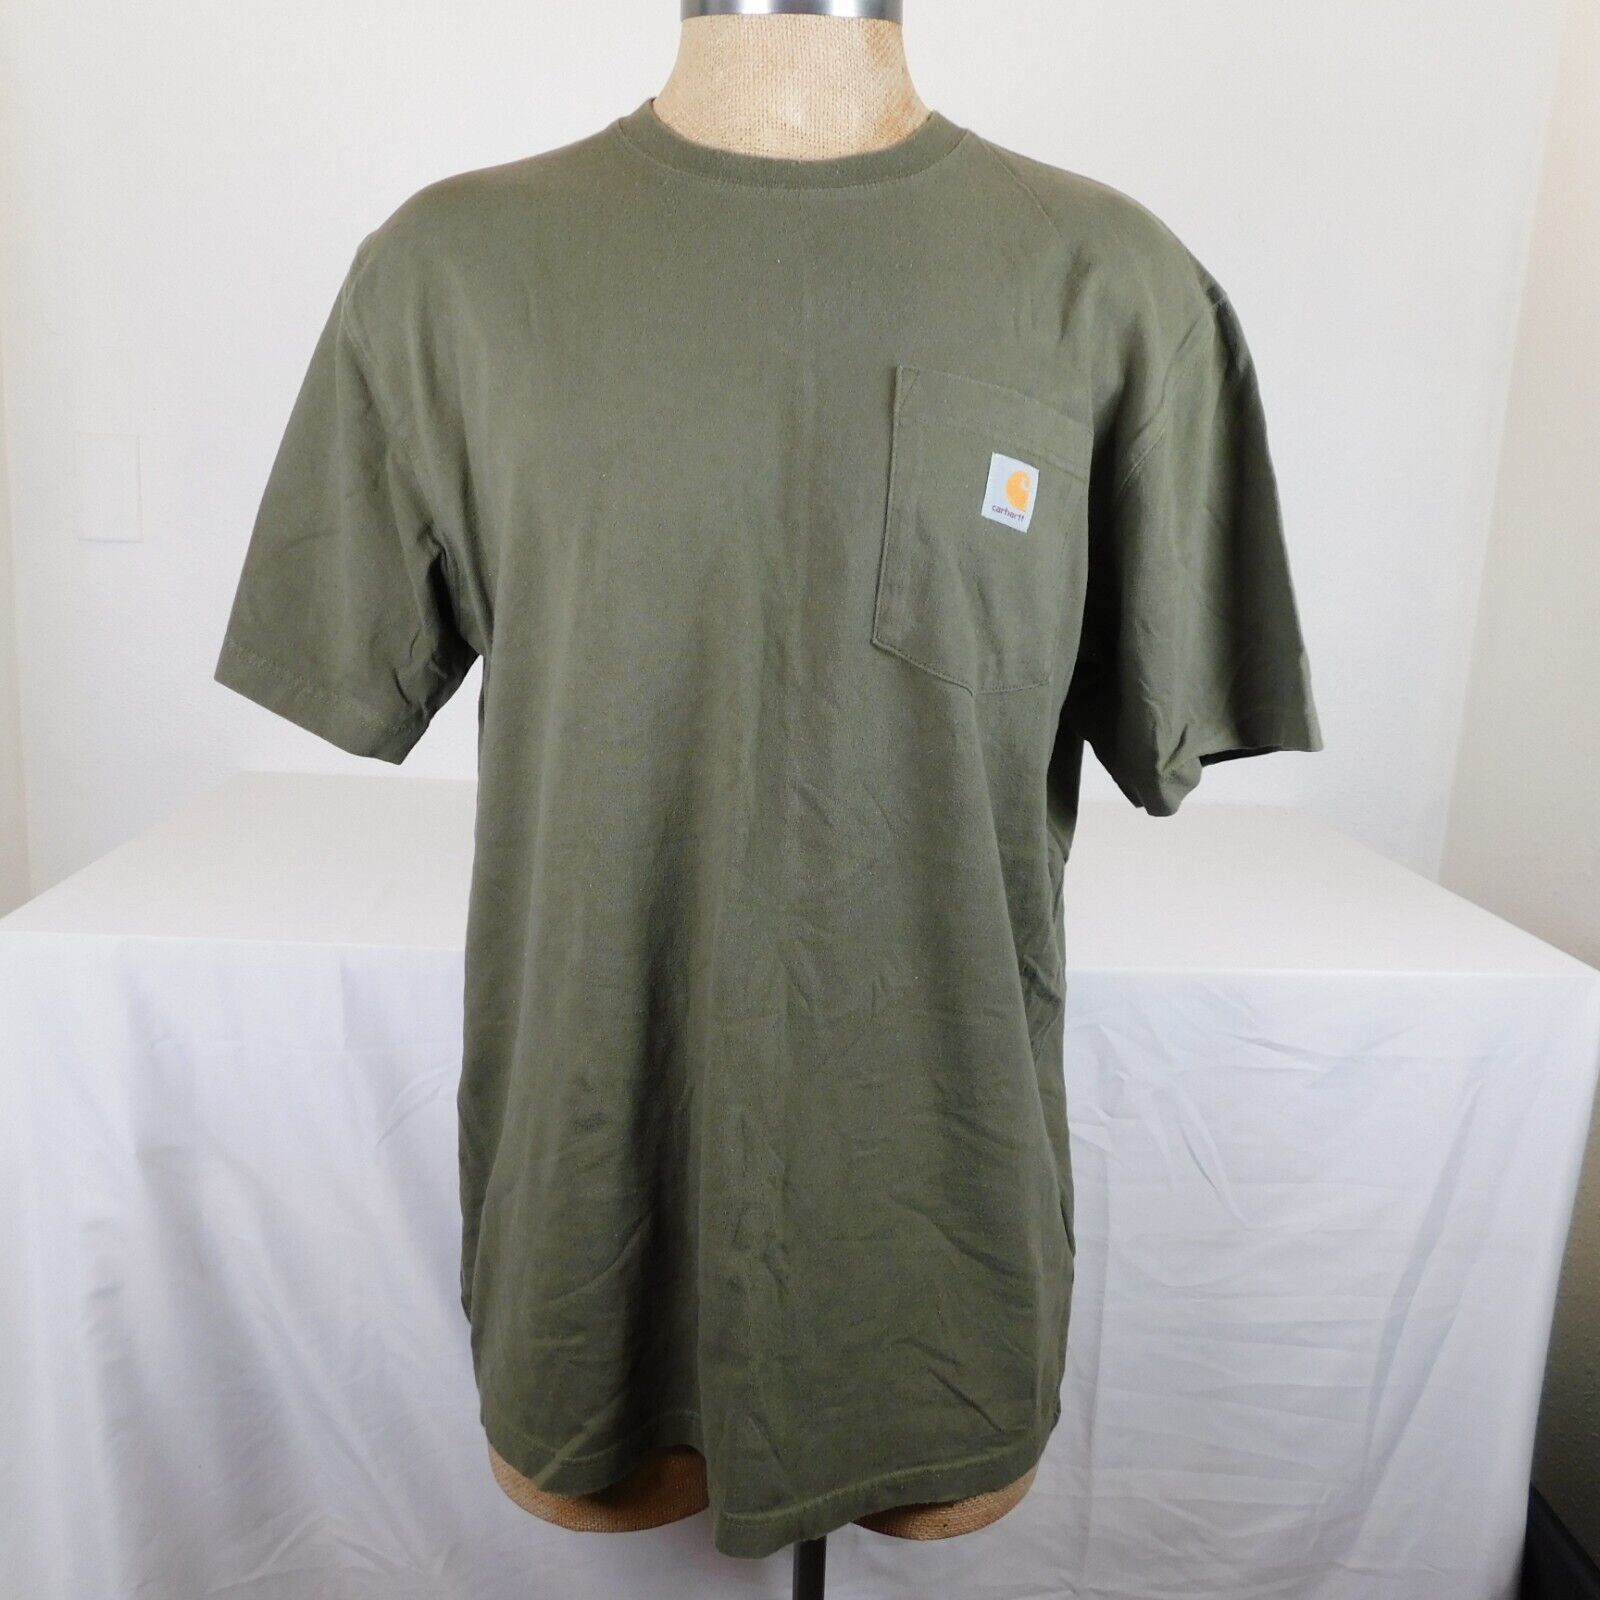 Primary image for Carhartt Men K87 Green T-Shirt Short Sleeve Crew Neck Chest Pocket Size L Tall